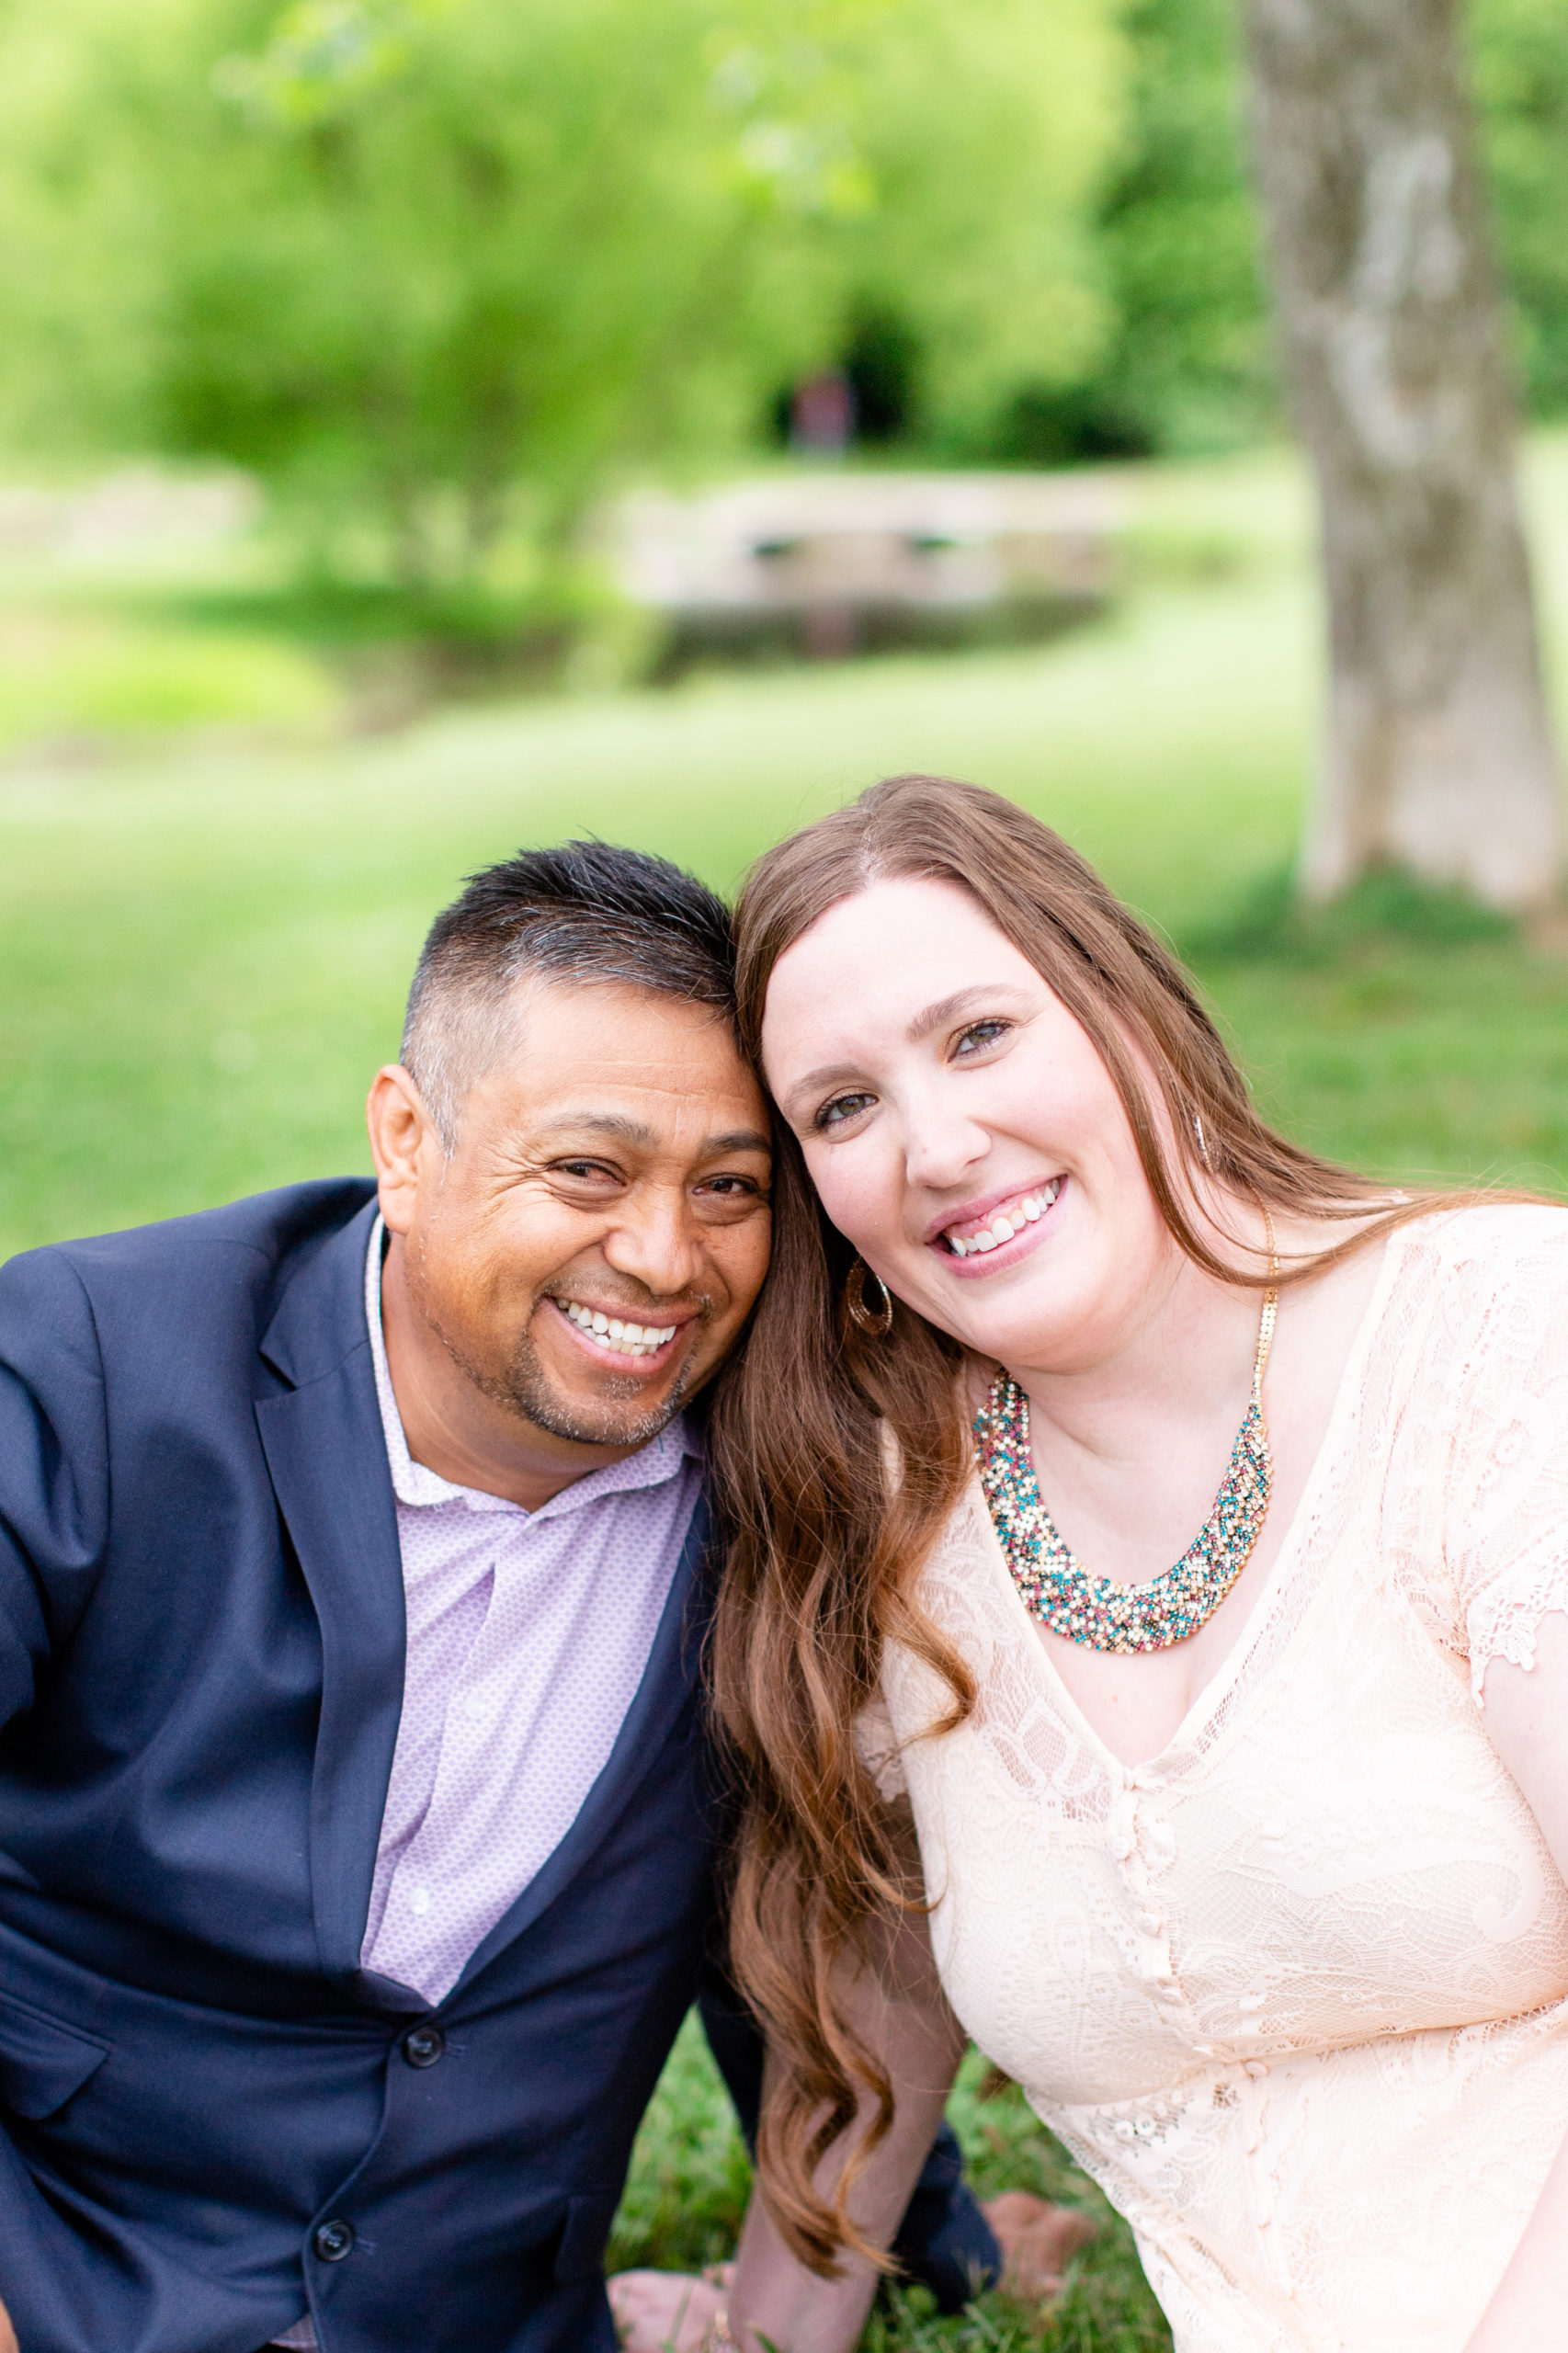 Brittany and Rosendo's engagement